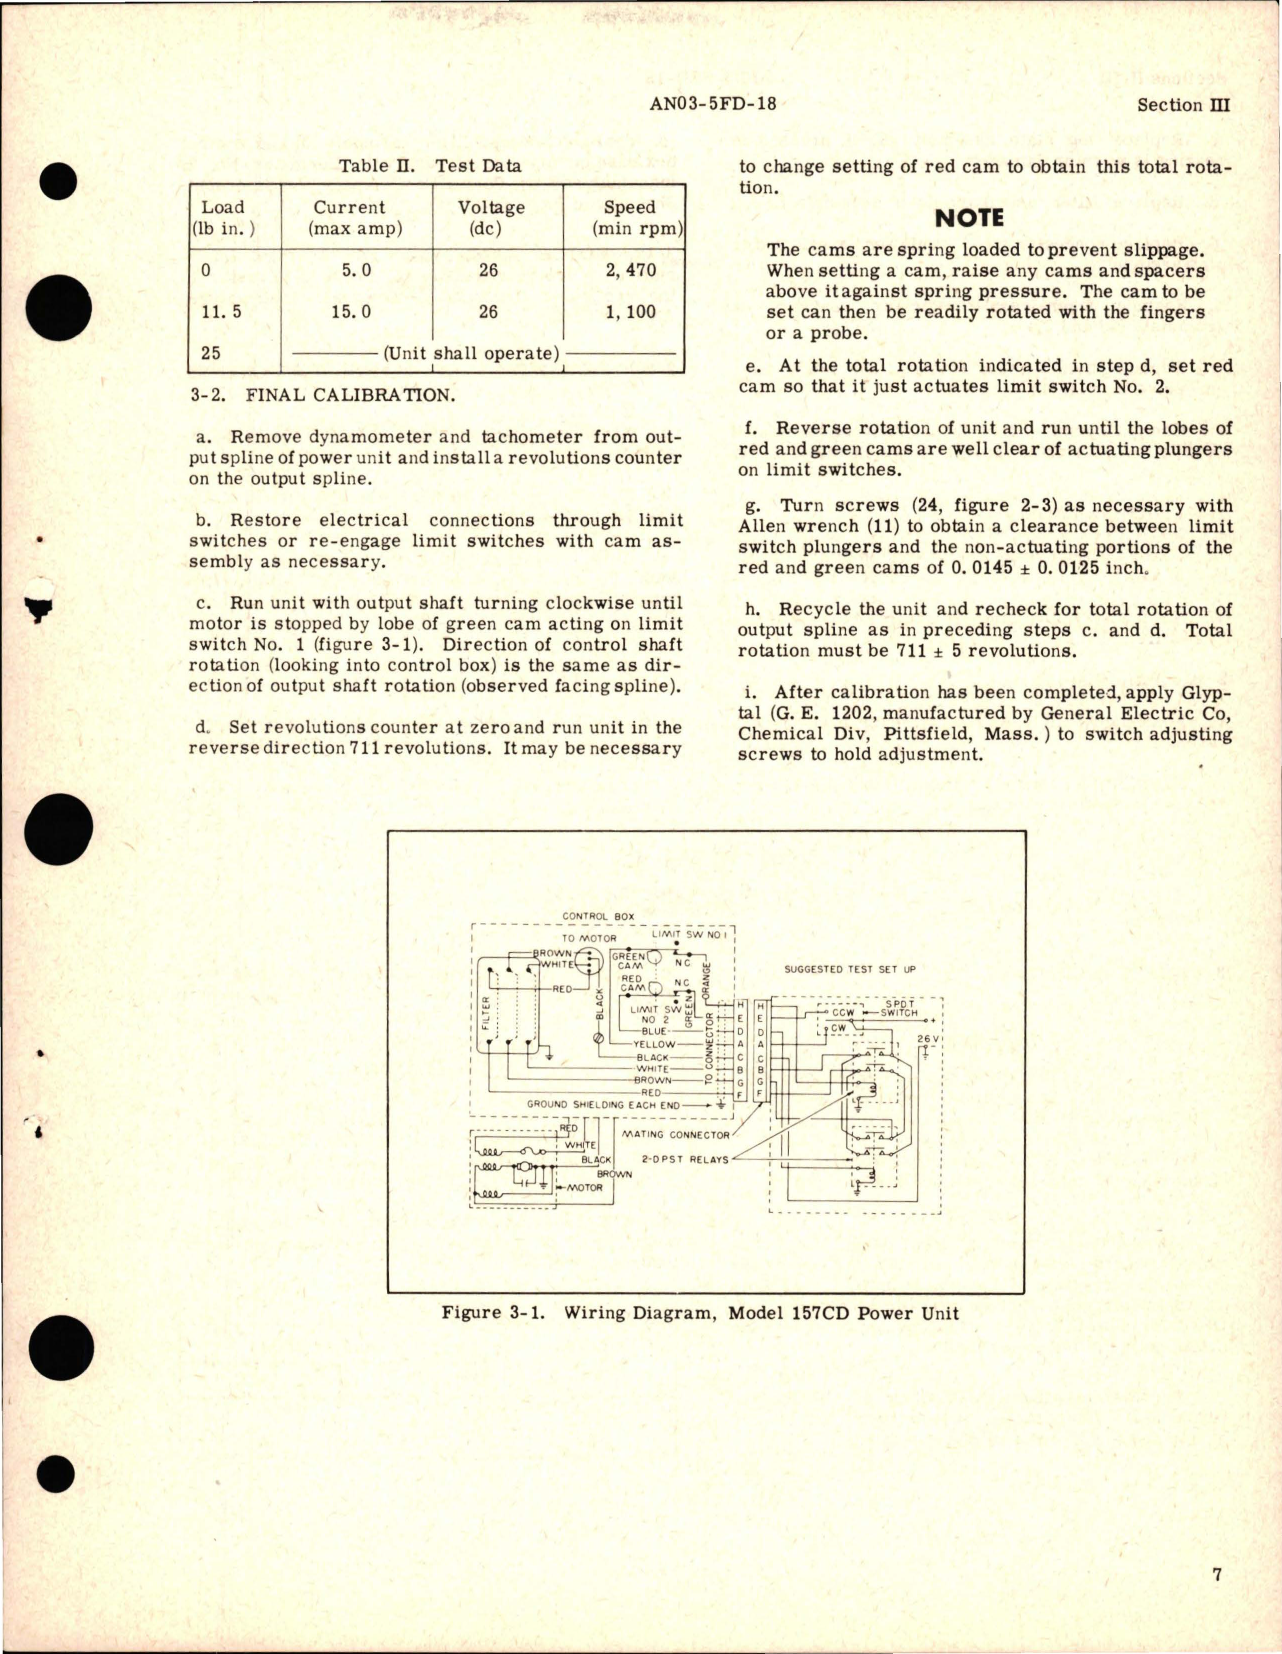 Sample page 9 from AirCorps Library document: Overhaul Instructions for Power Unit 